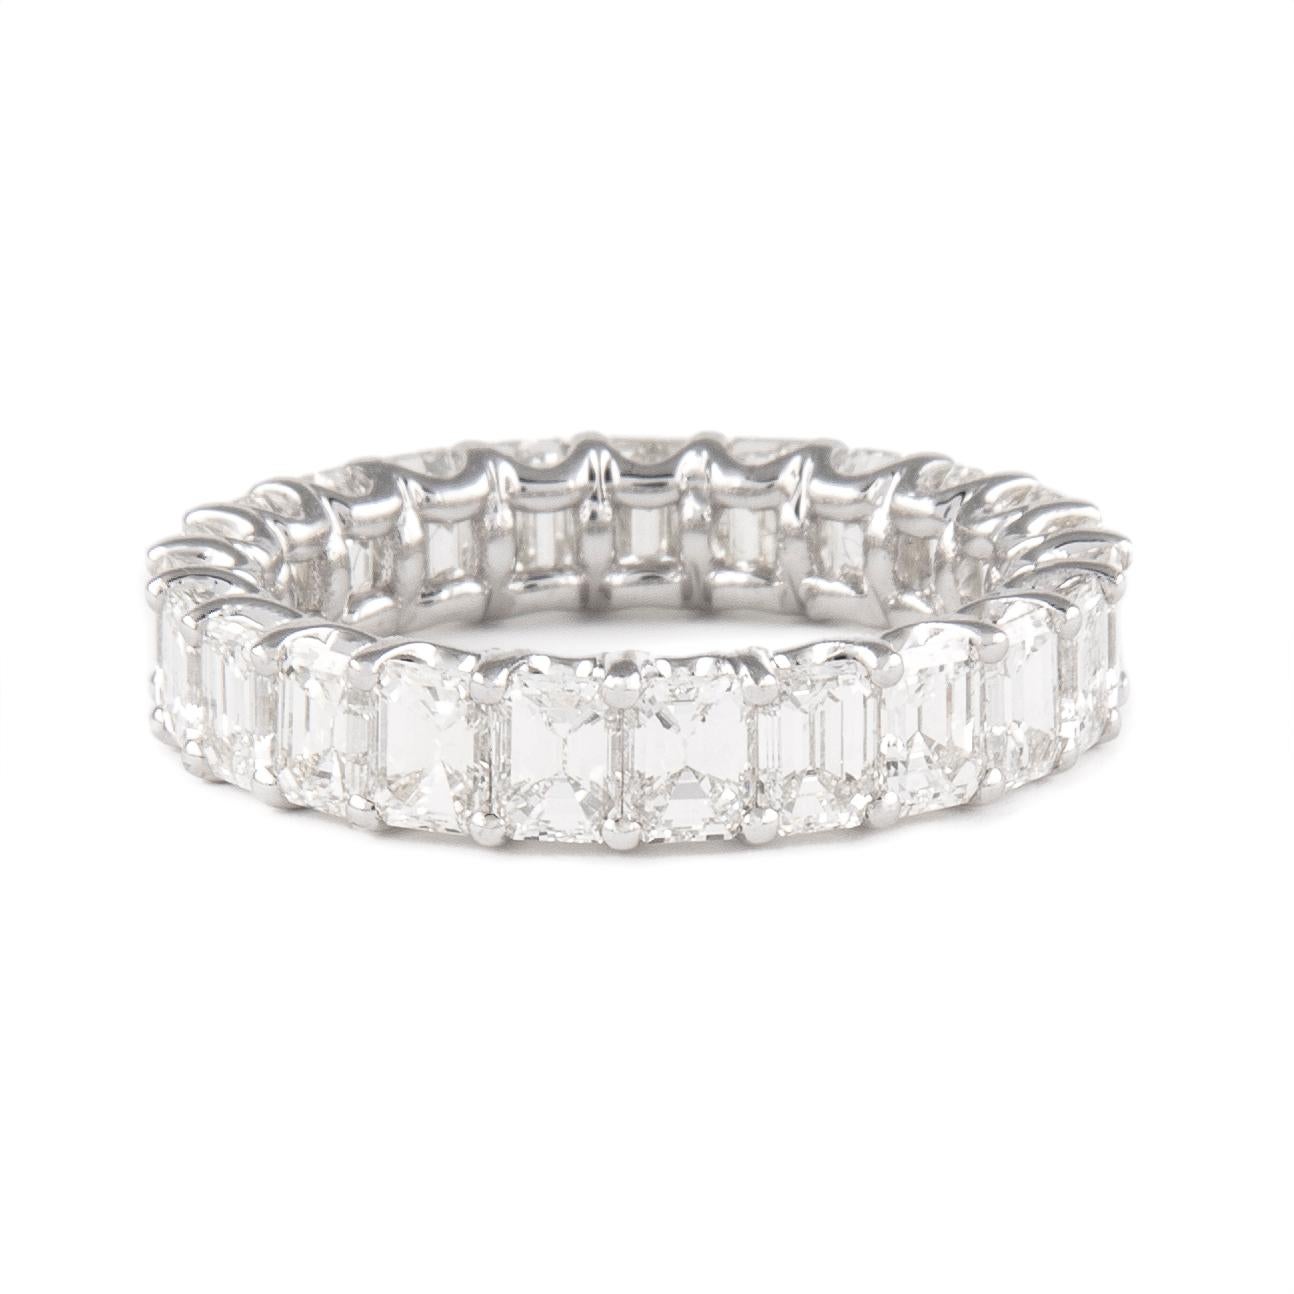 Stunning emerald cut diamond eternity band, by Alexander Beverly Hills.
23 emerald cut diamonds, 4.26 carats total. D-F color and VS clarity. Set in 18k white gold, 3.60 grams, size 6.5. 
Accommodated with an up-to-date appraisal by a GIA G.G. once